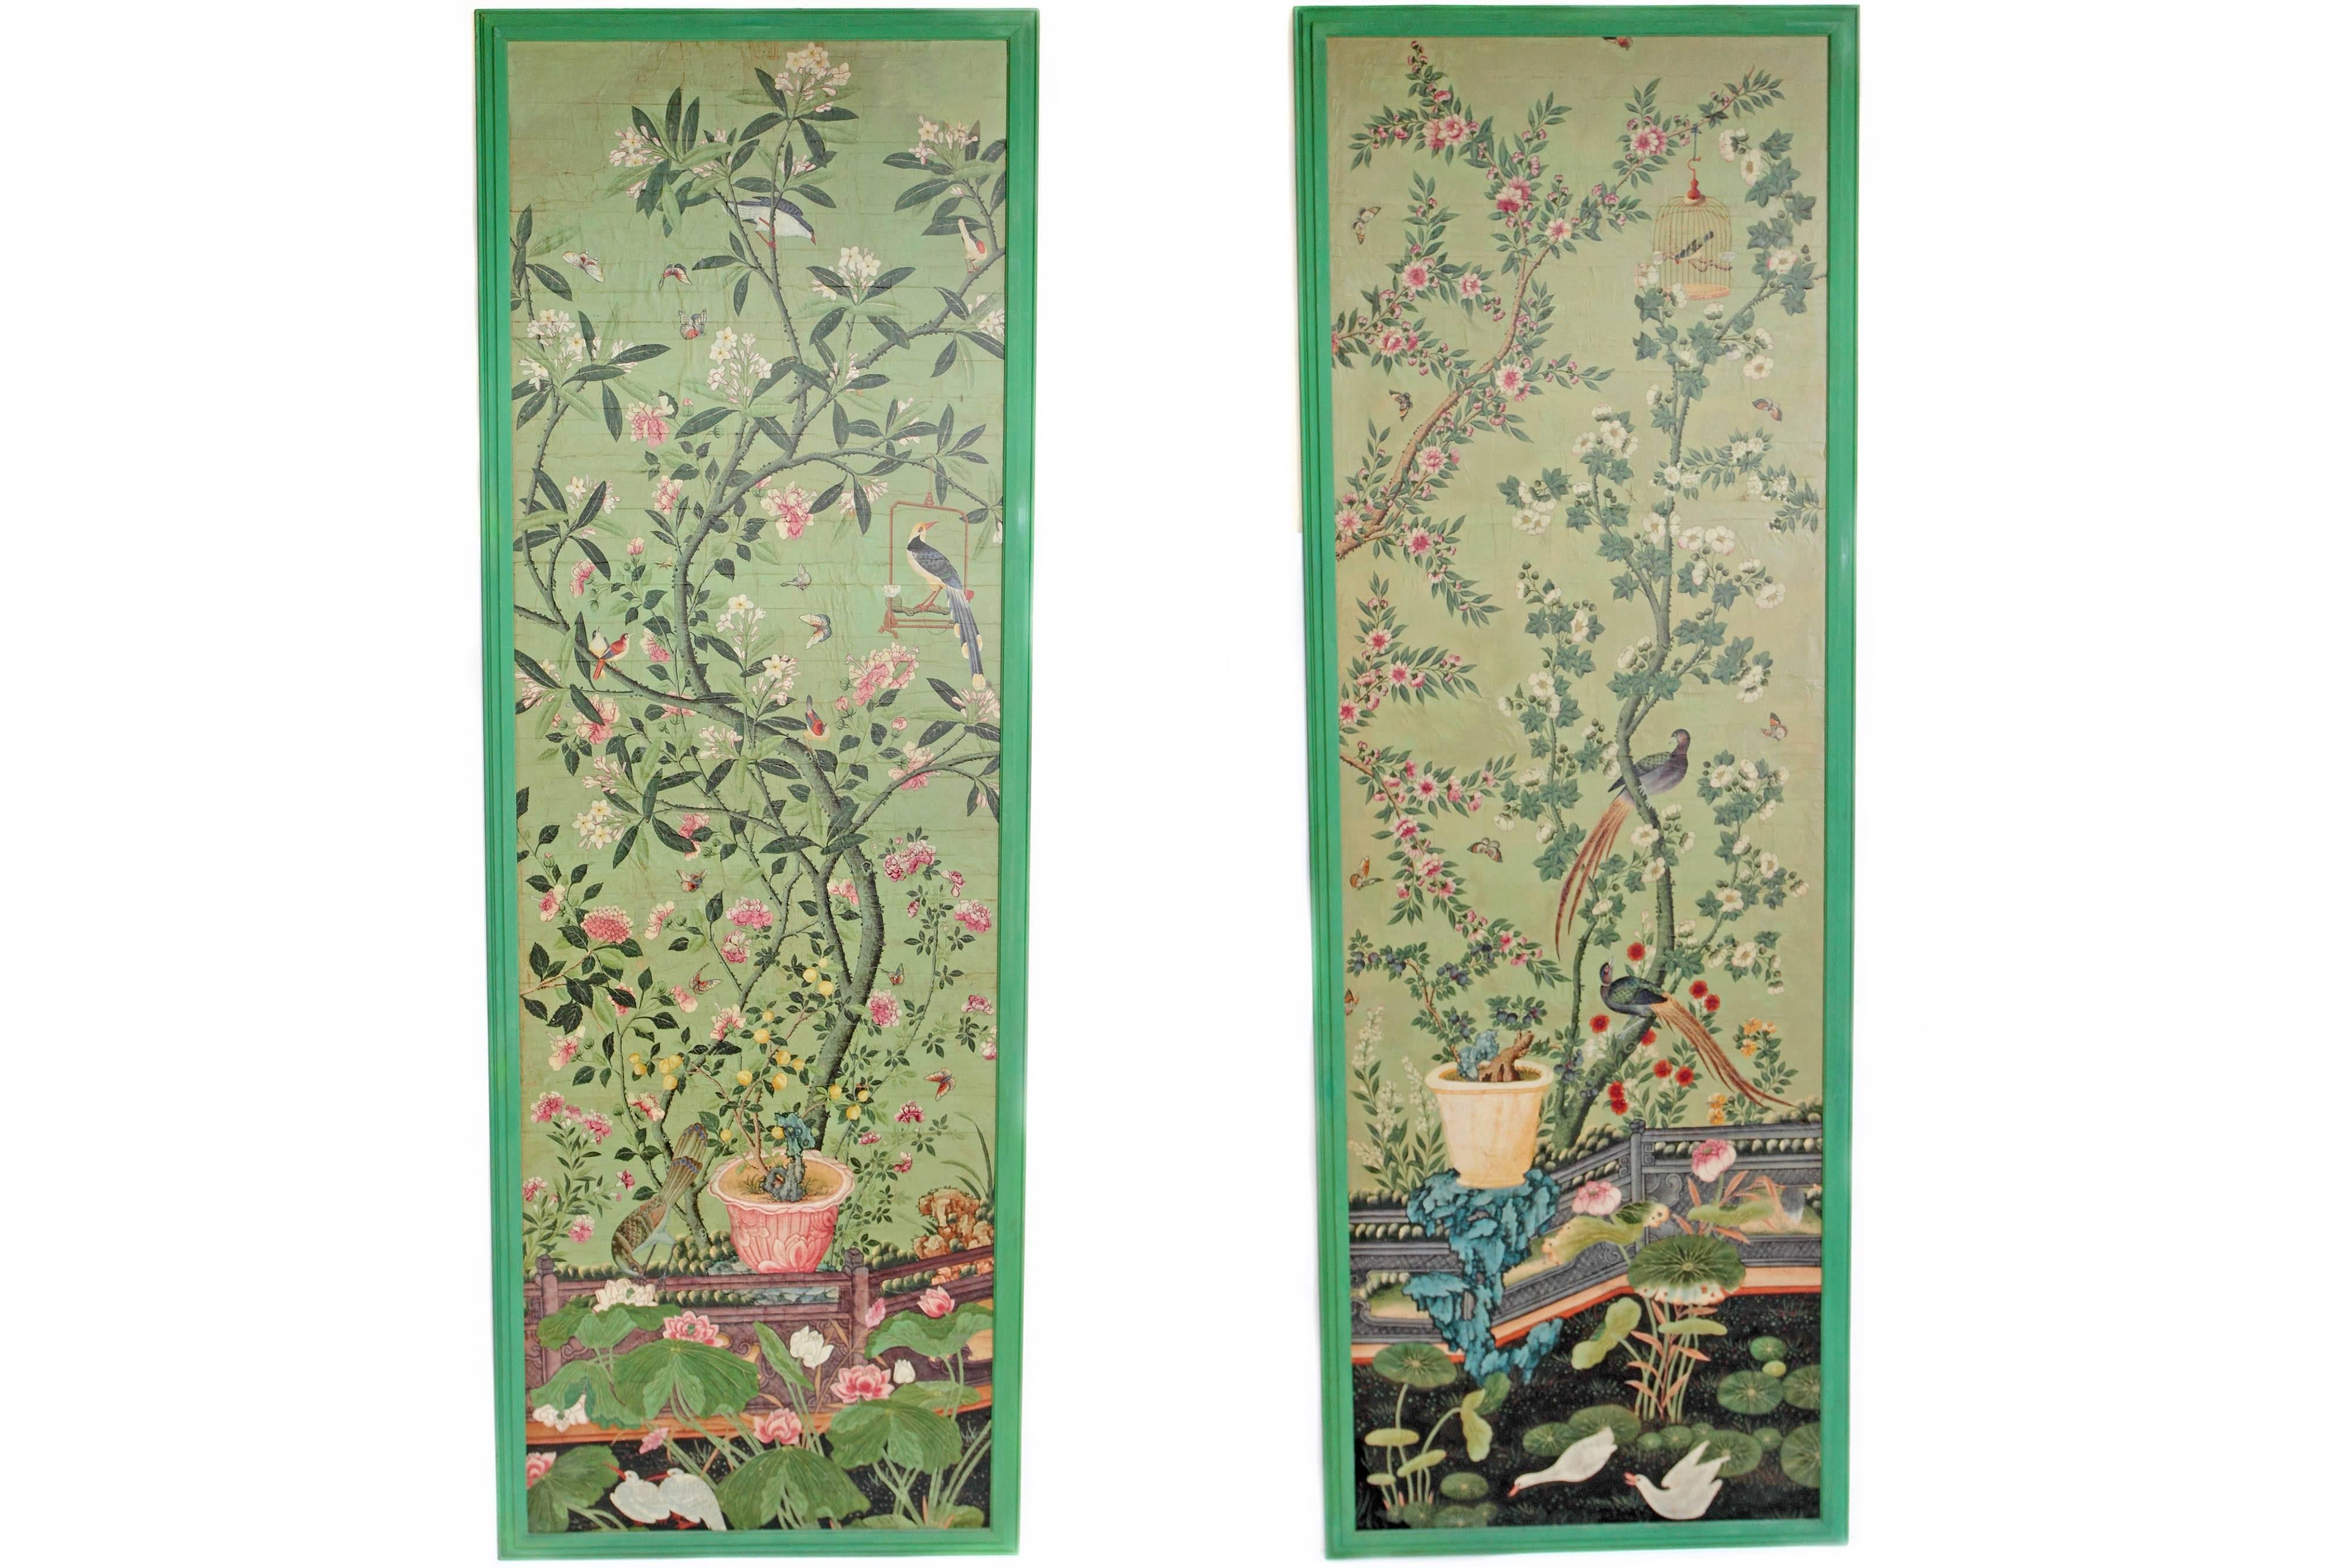 A magnificent pair of beautifully hand painted Chinese wallpaper panels. Depicted are tall, Swaying plants with a variety of birds and butterflies around plants and on the ground. 